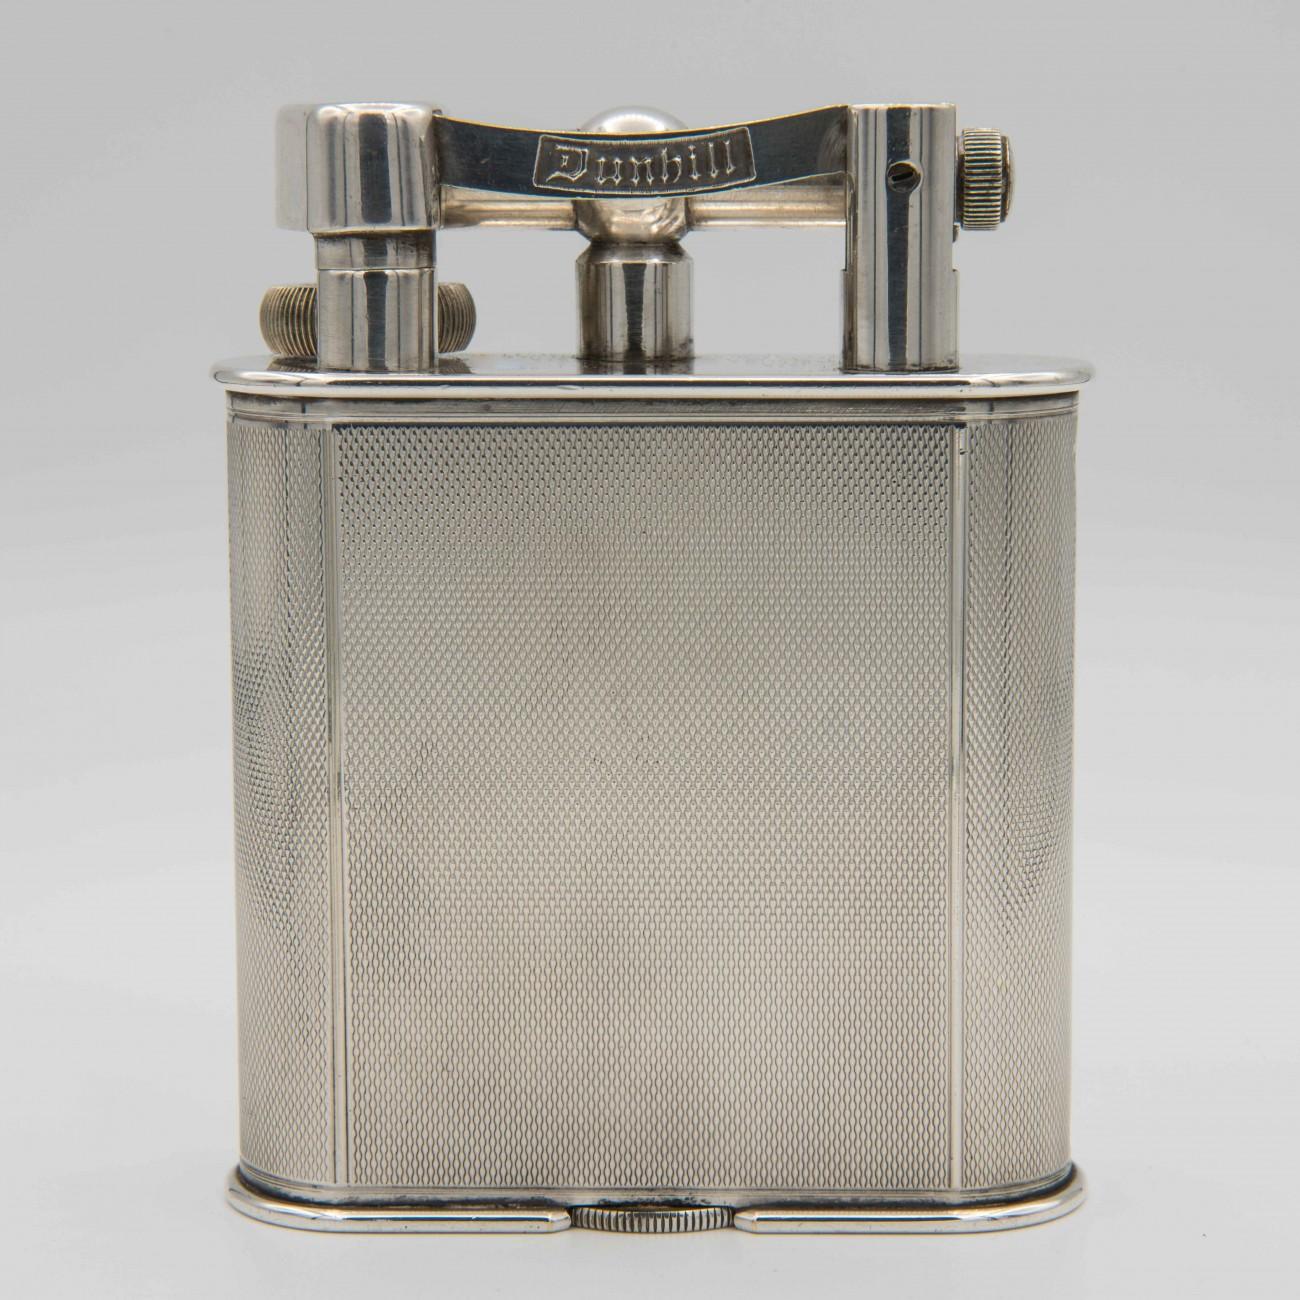 An engine turned silver plated Dunhill 'Giant' lighter; circa 1948. The 'Giant' table lighter was first seen in the Dunhill catalogue in 1929 and was an immediate success.

Dimensions: 10.5 cm/4 inches (height) x 8 cm/3? inches (width) x 2.5 cm/1